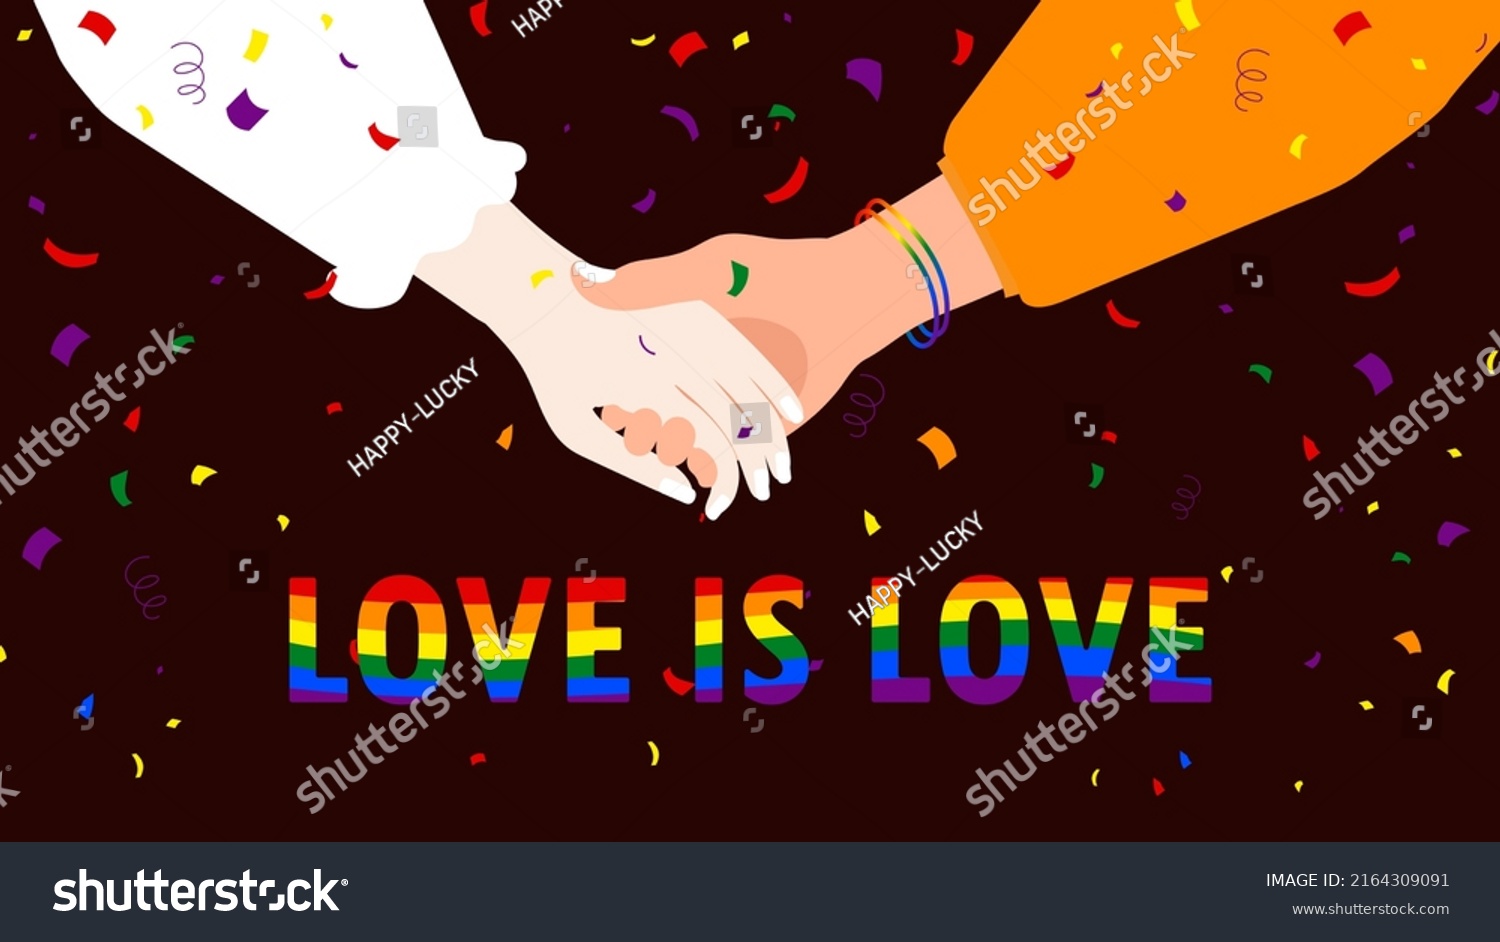 Couple Lesbians Holding Hands Celebrate Pride Stock Vector Royalty Free 2164309091 Shutterstock